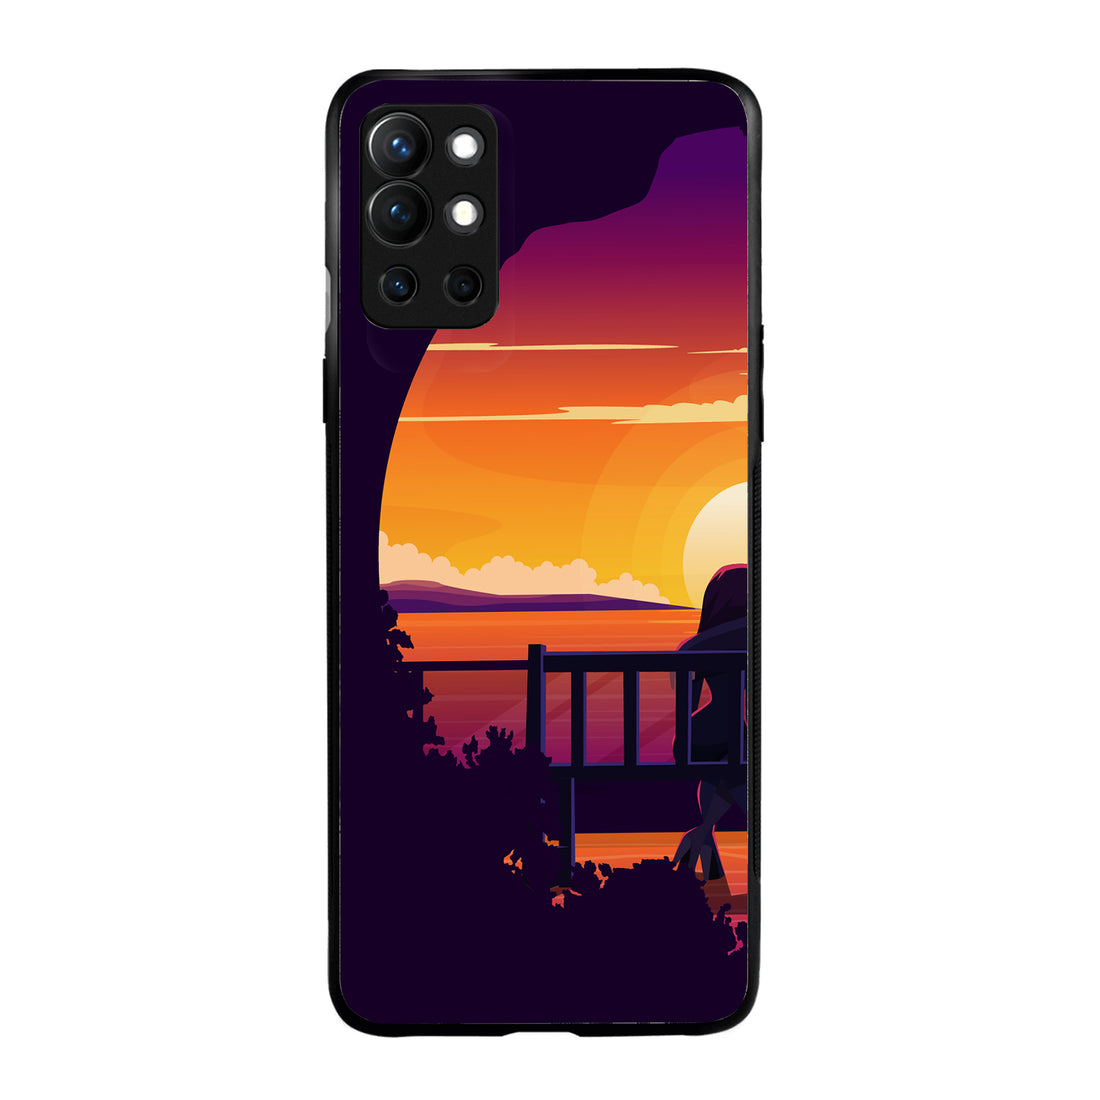 Sunset Date Girl Couple Oneplus 9 R Back Case